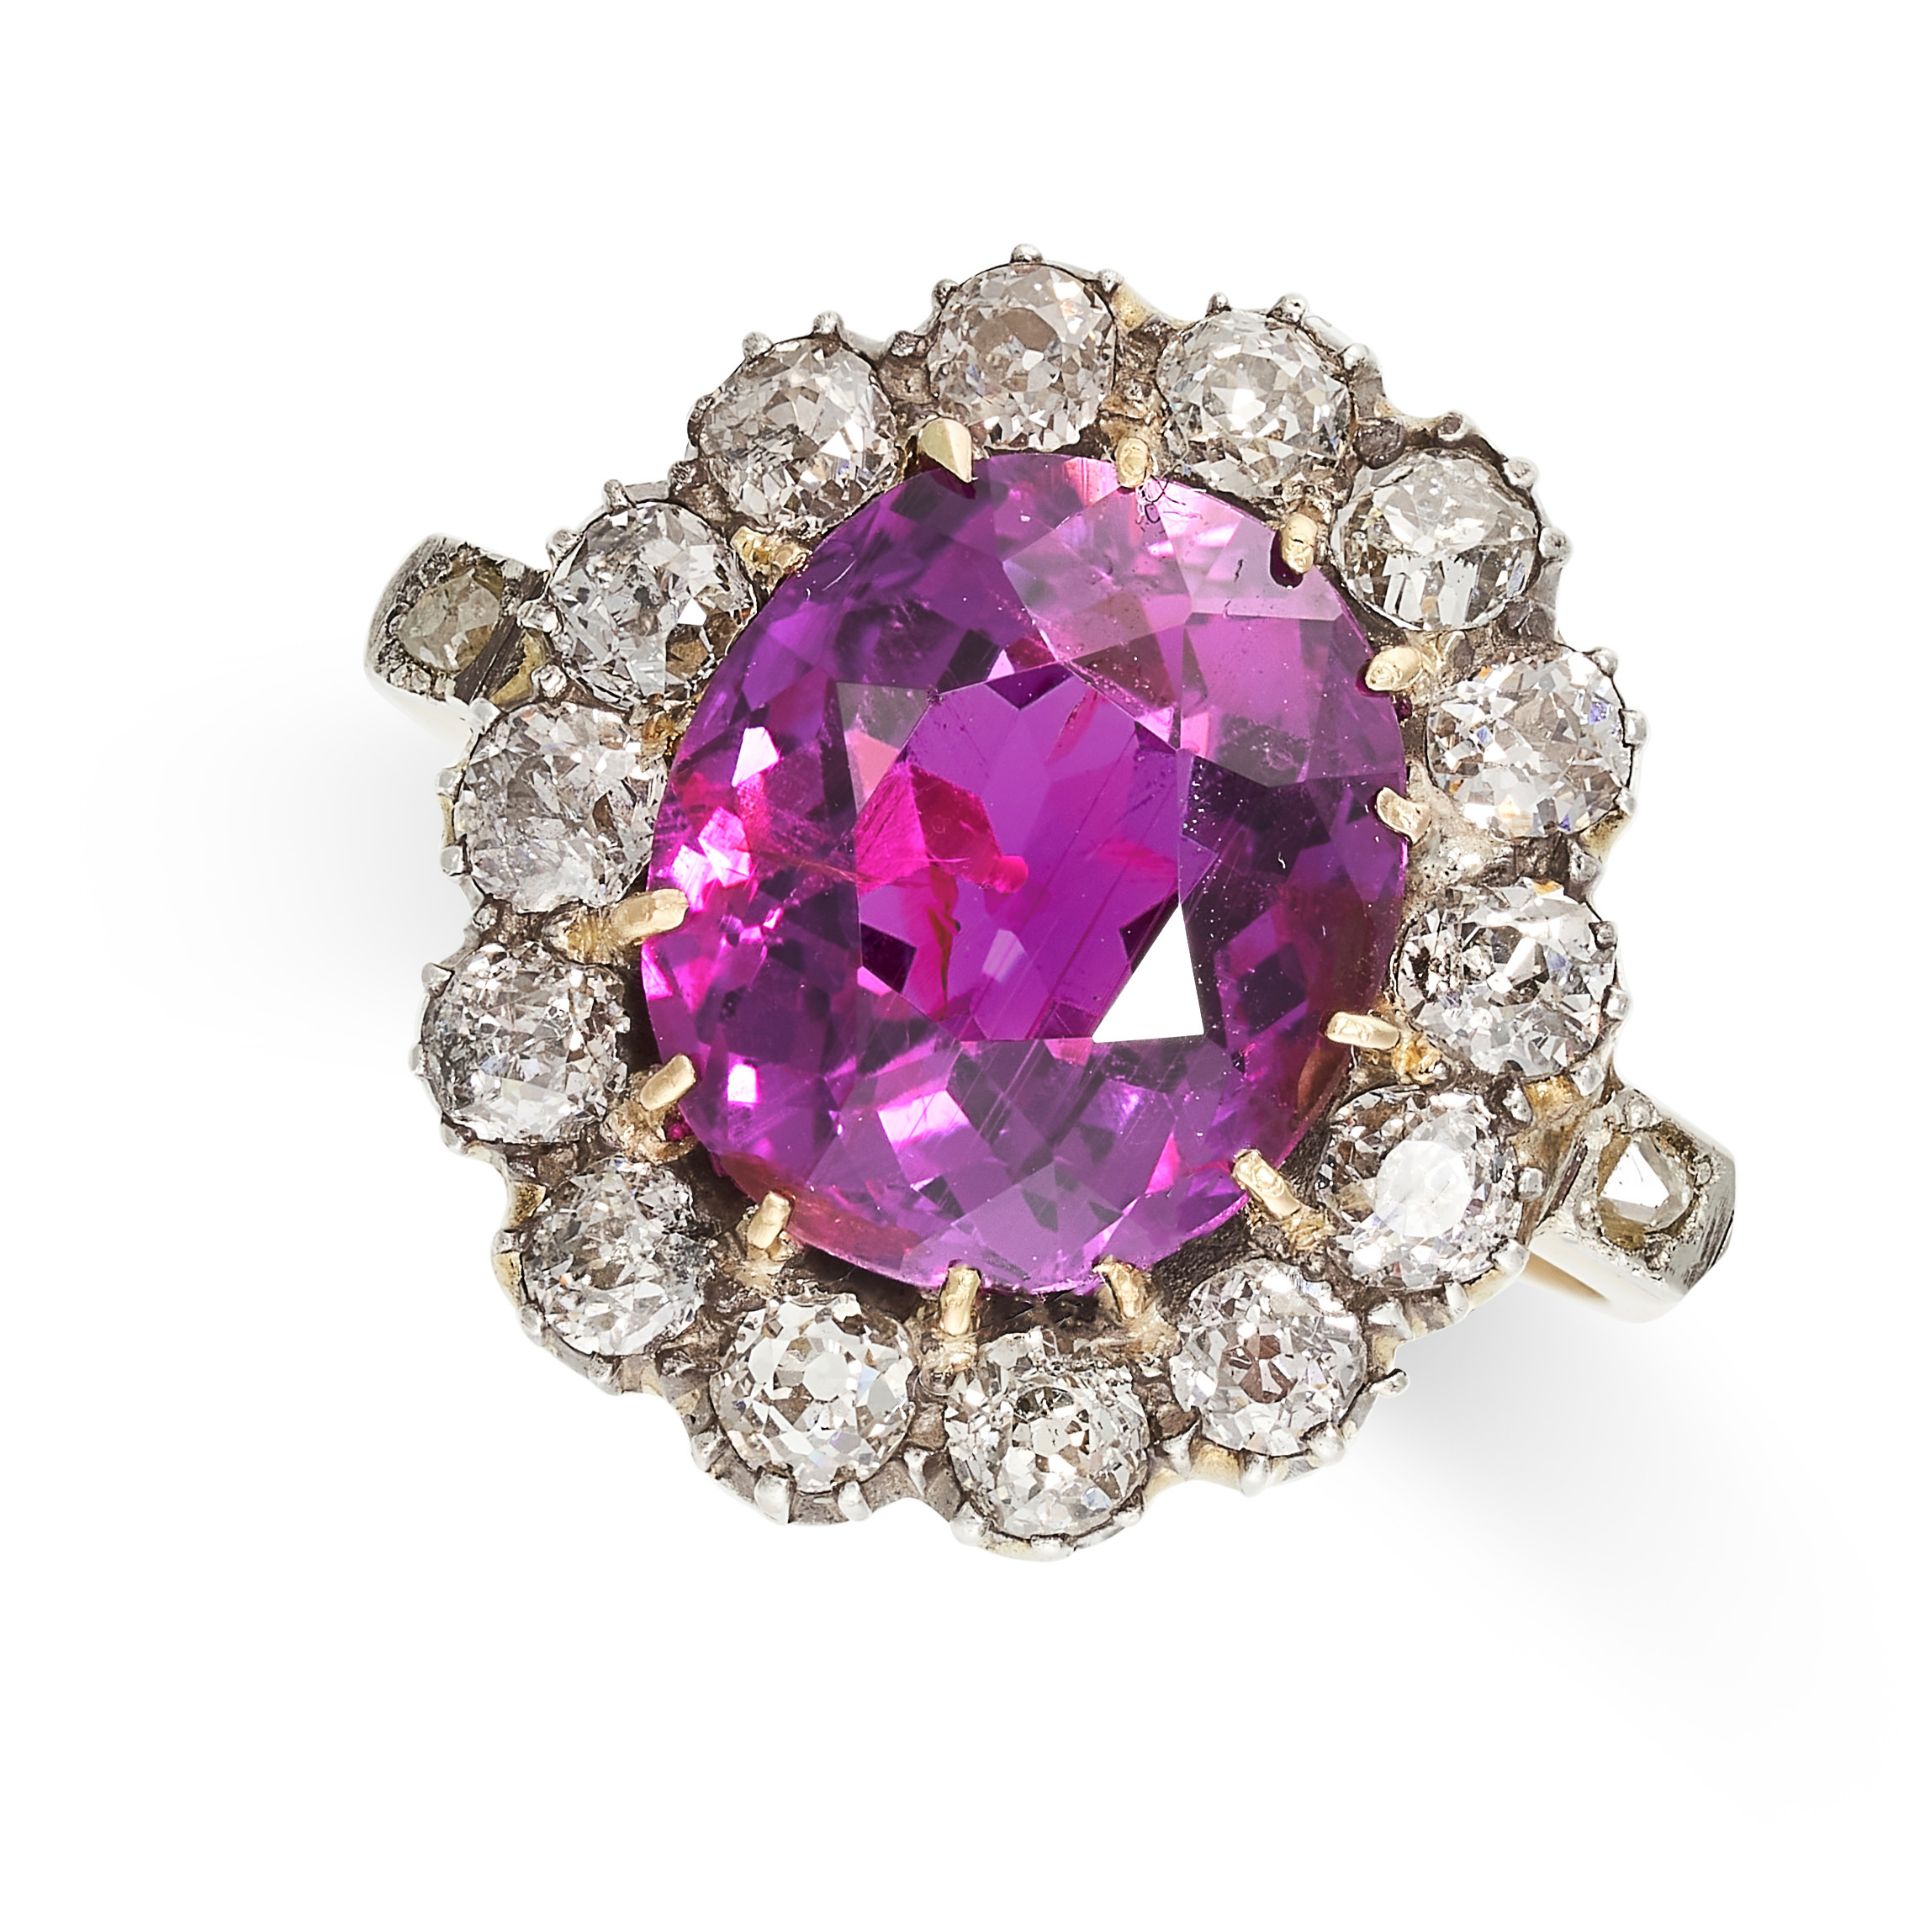 AN ANTIQUE UNHEATED RUBY AND DIAMOND RING in yellow gold, set with an oval cut ruby of 6.93 carats